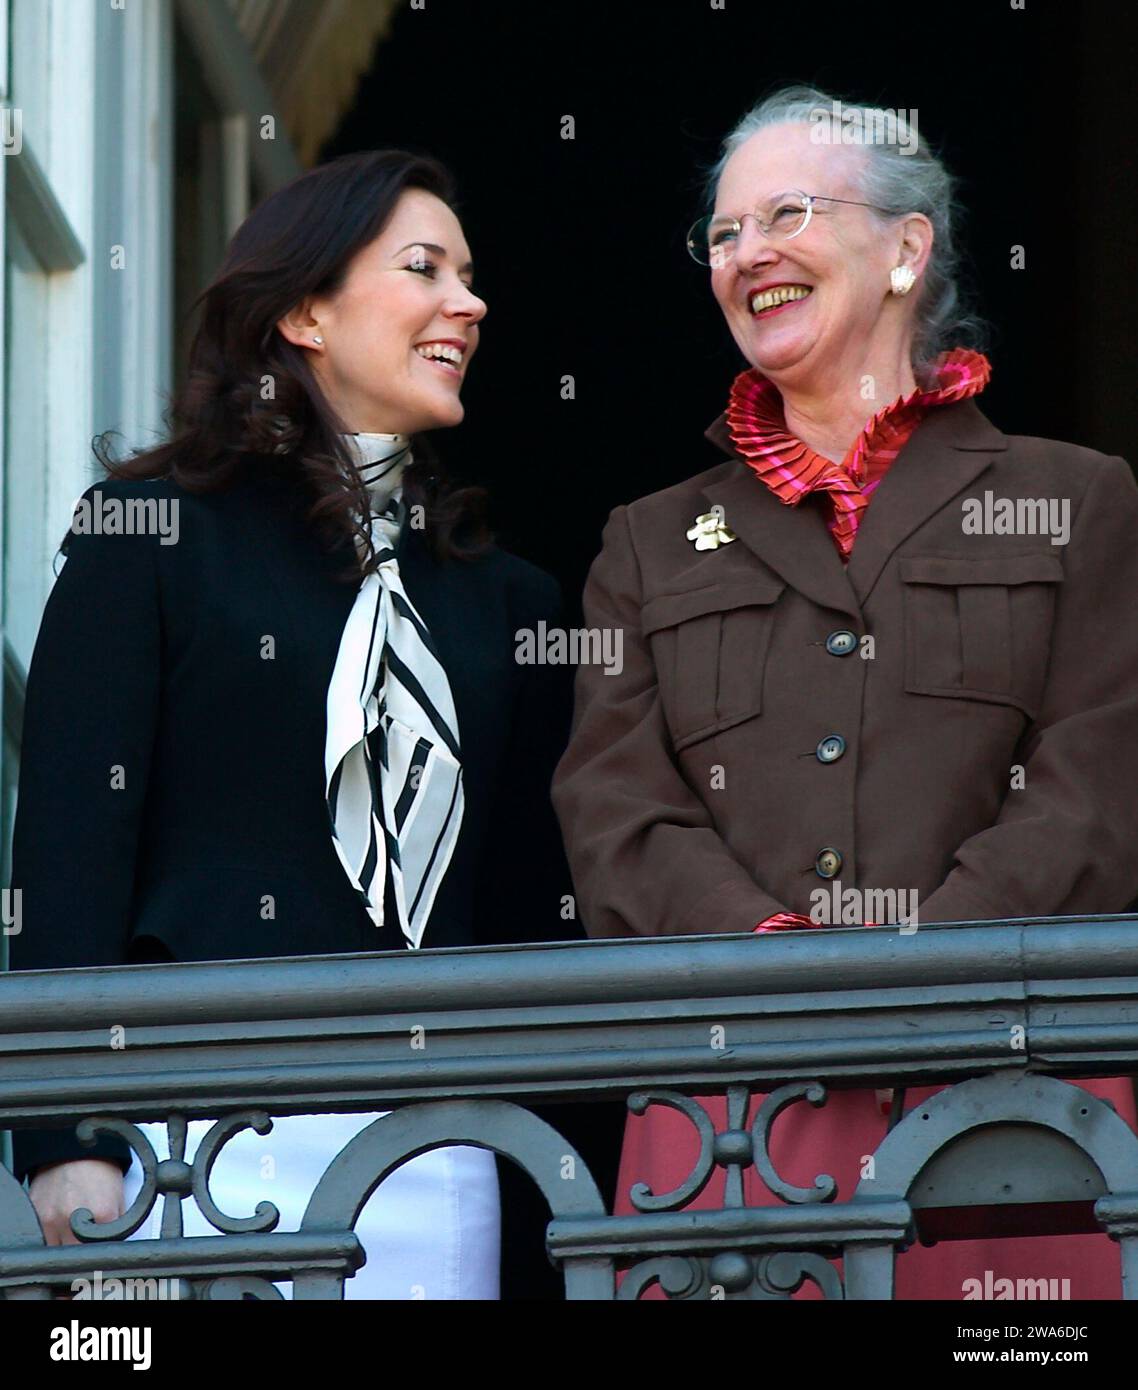 (ARCHIVE) The entire Danish royal family on the balcony at Amalienborg in Copenhagen on Friday 16 April 2004, where Queen Margrethe's 64th birthday was celebrated. Queen Margrethe enjoying herself with her future daughter-in-law Mary Donaldson. Denmarks Queen Margrethe announced in her New Years speech that she is abdicating on February 14. Crown Prince Frederik will take her place and become King Frederik the 10th of Denmark, while Australian born Crown Princess Mary will be Queen of Denmark.. (Photo: Keld Navntoft / Scanpix 2024) Stock Photo